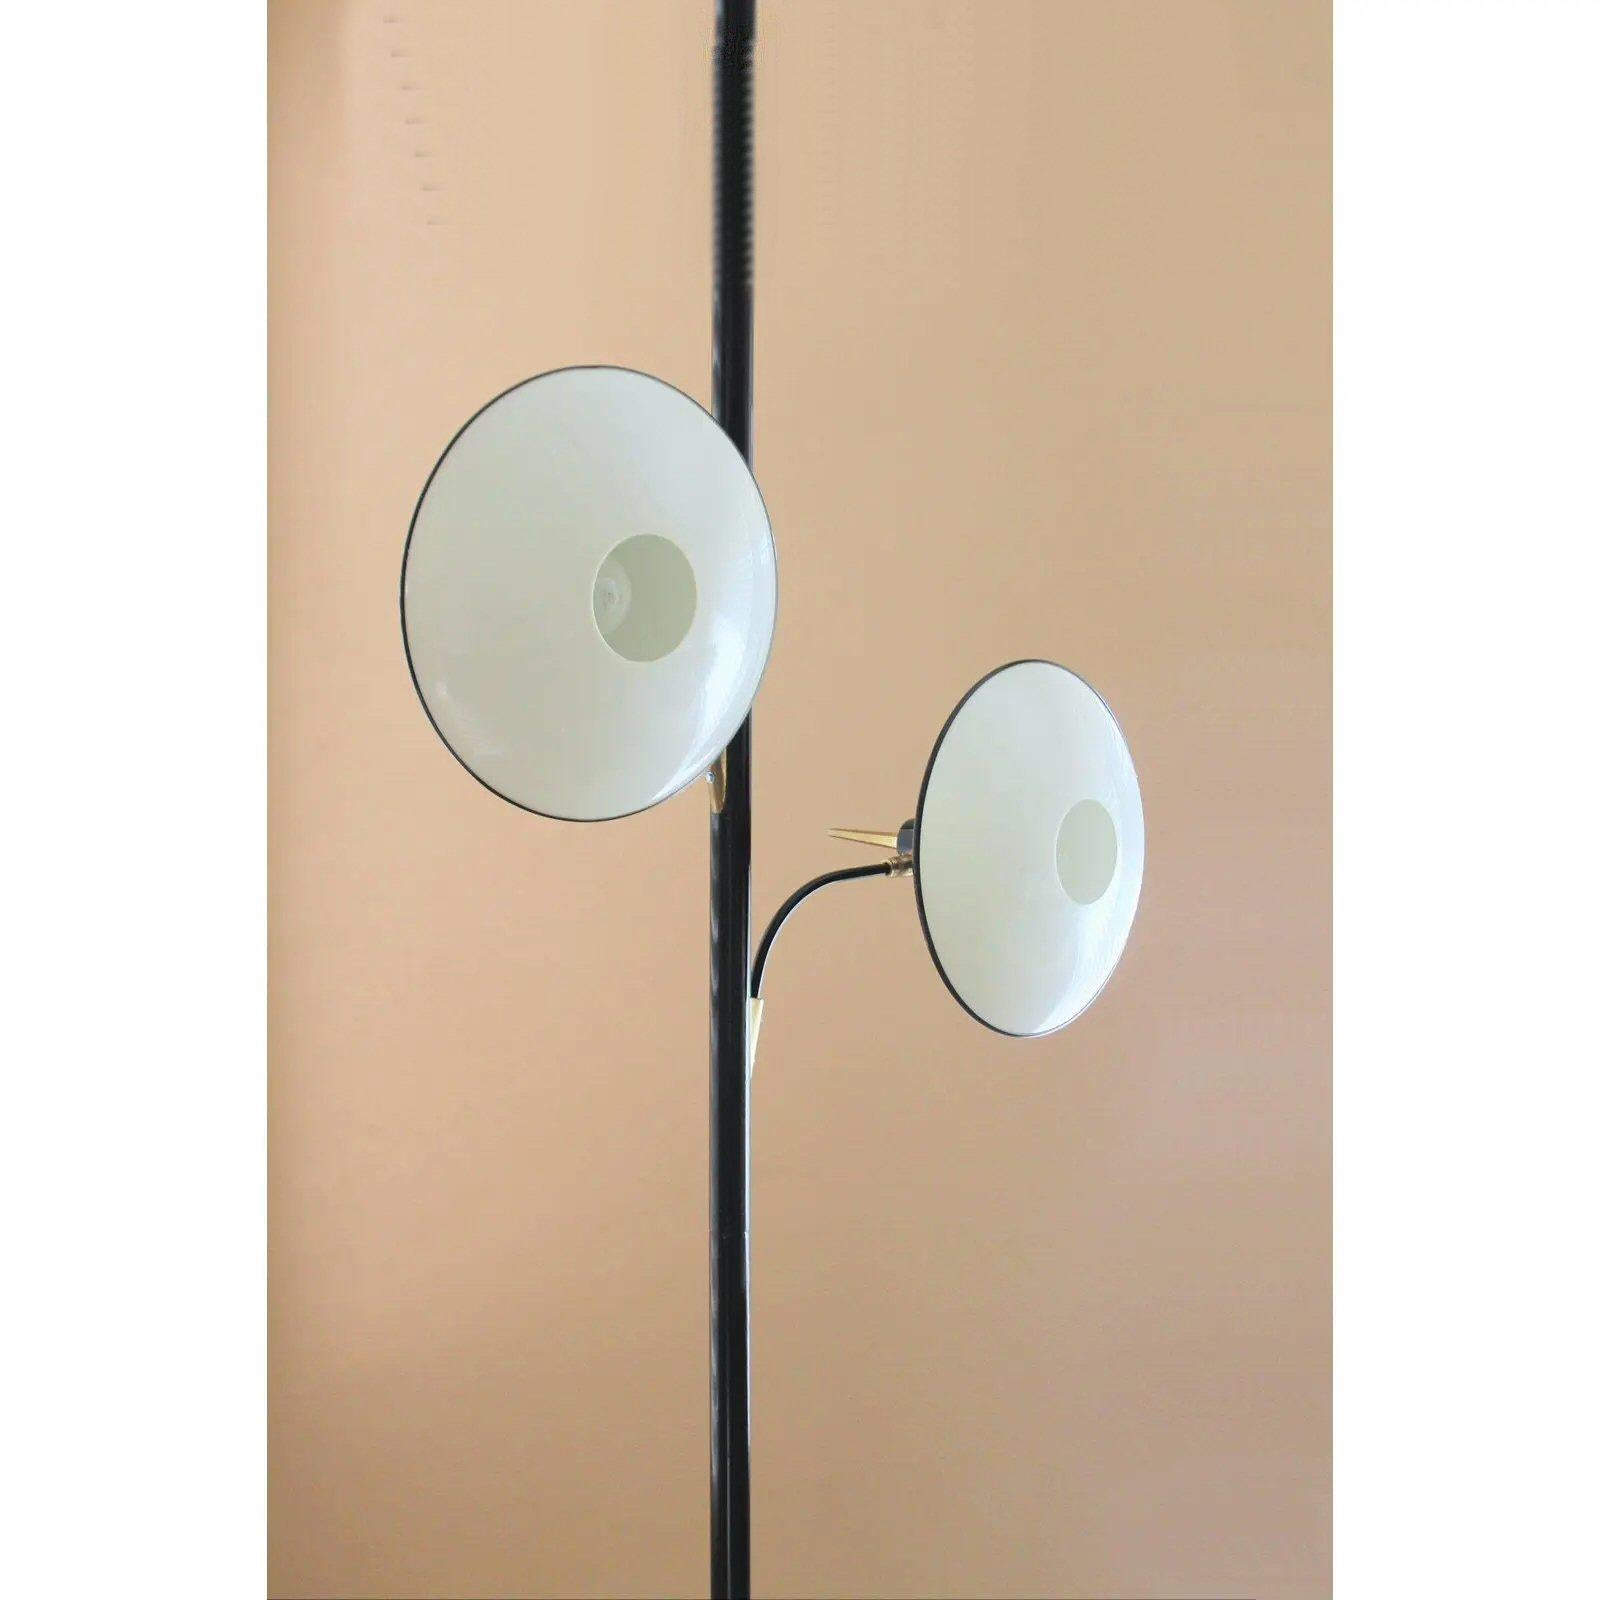 American Mid Century Modern Saucer Tension Pole by Laurel Lamp!